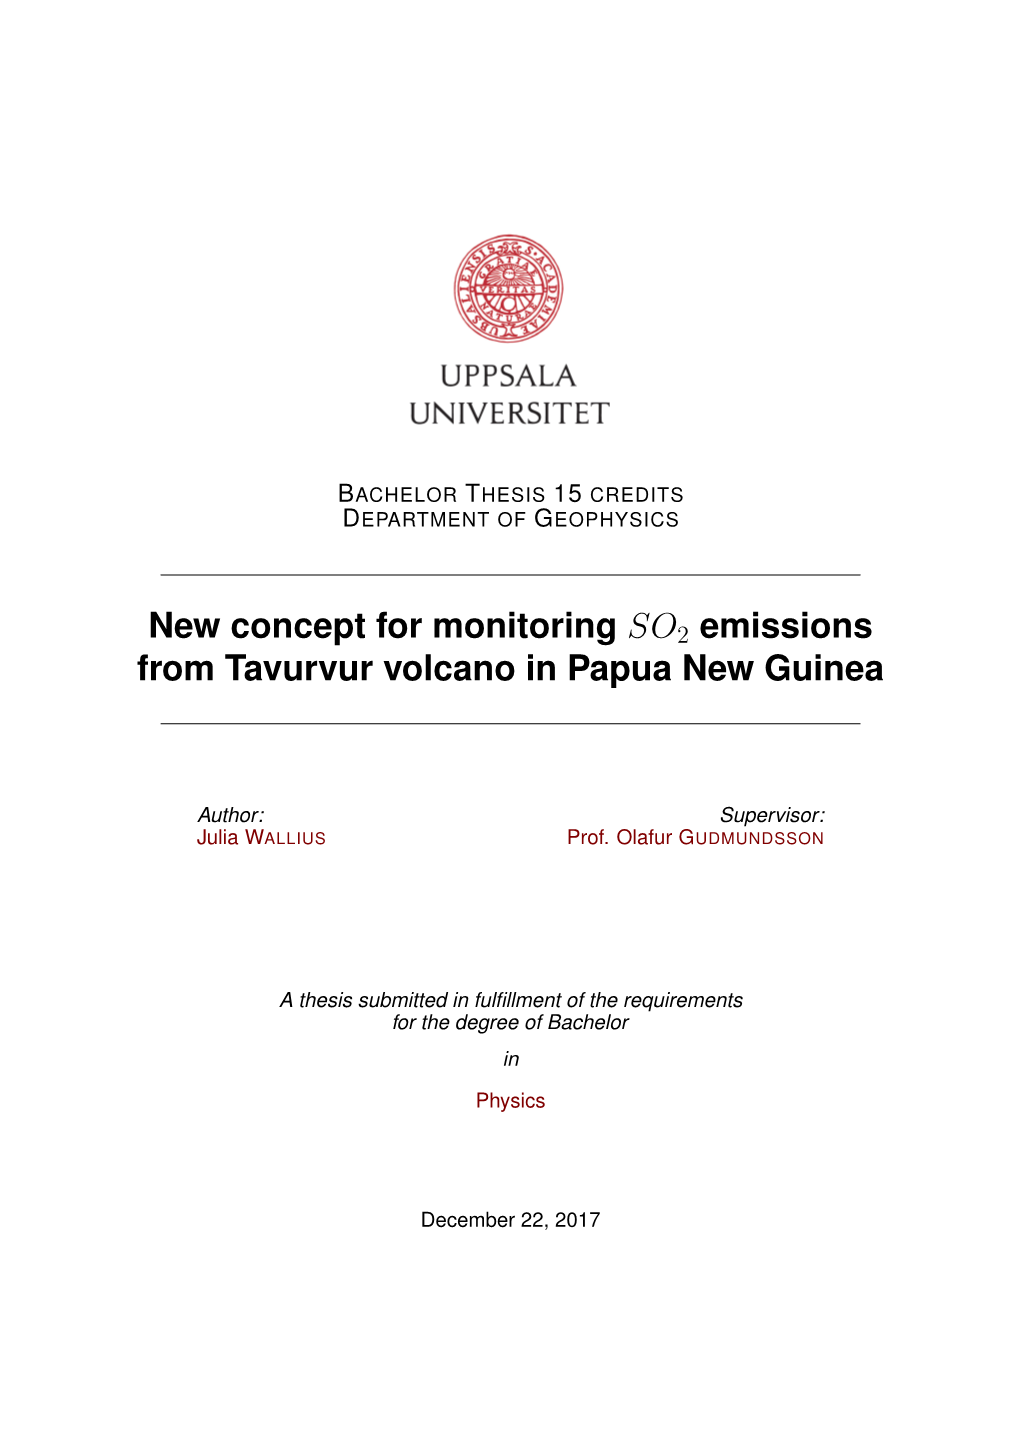 New Concept for Monitoring SO2 Emissions from Tavurvur Volcano in Papua New Guinea